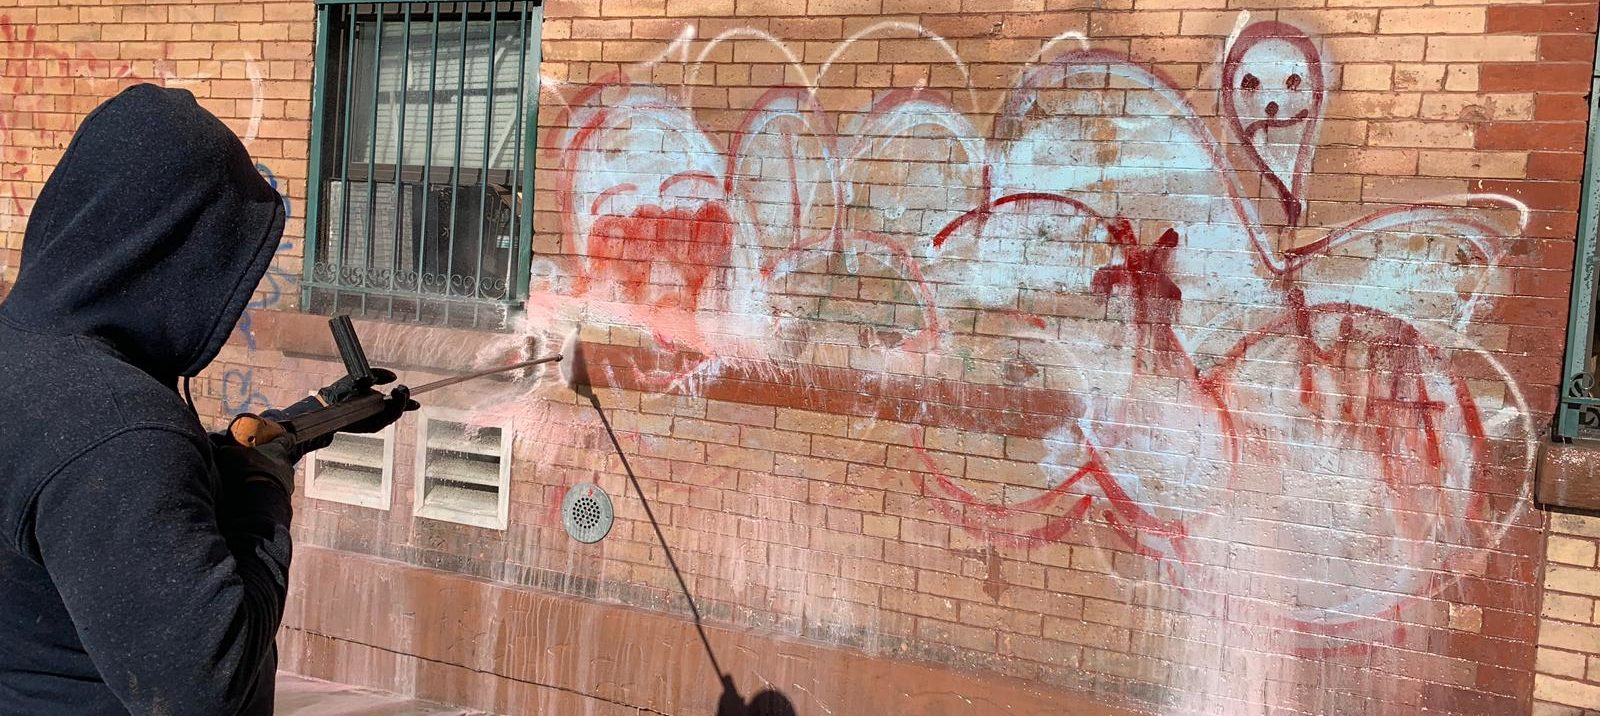 What Are The Best Graffiti Removal Queens Companies?